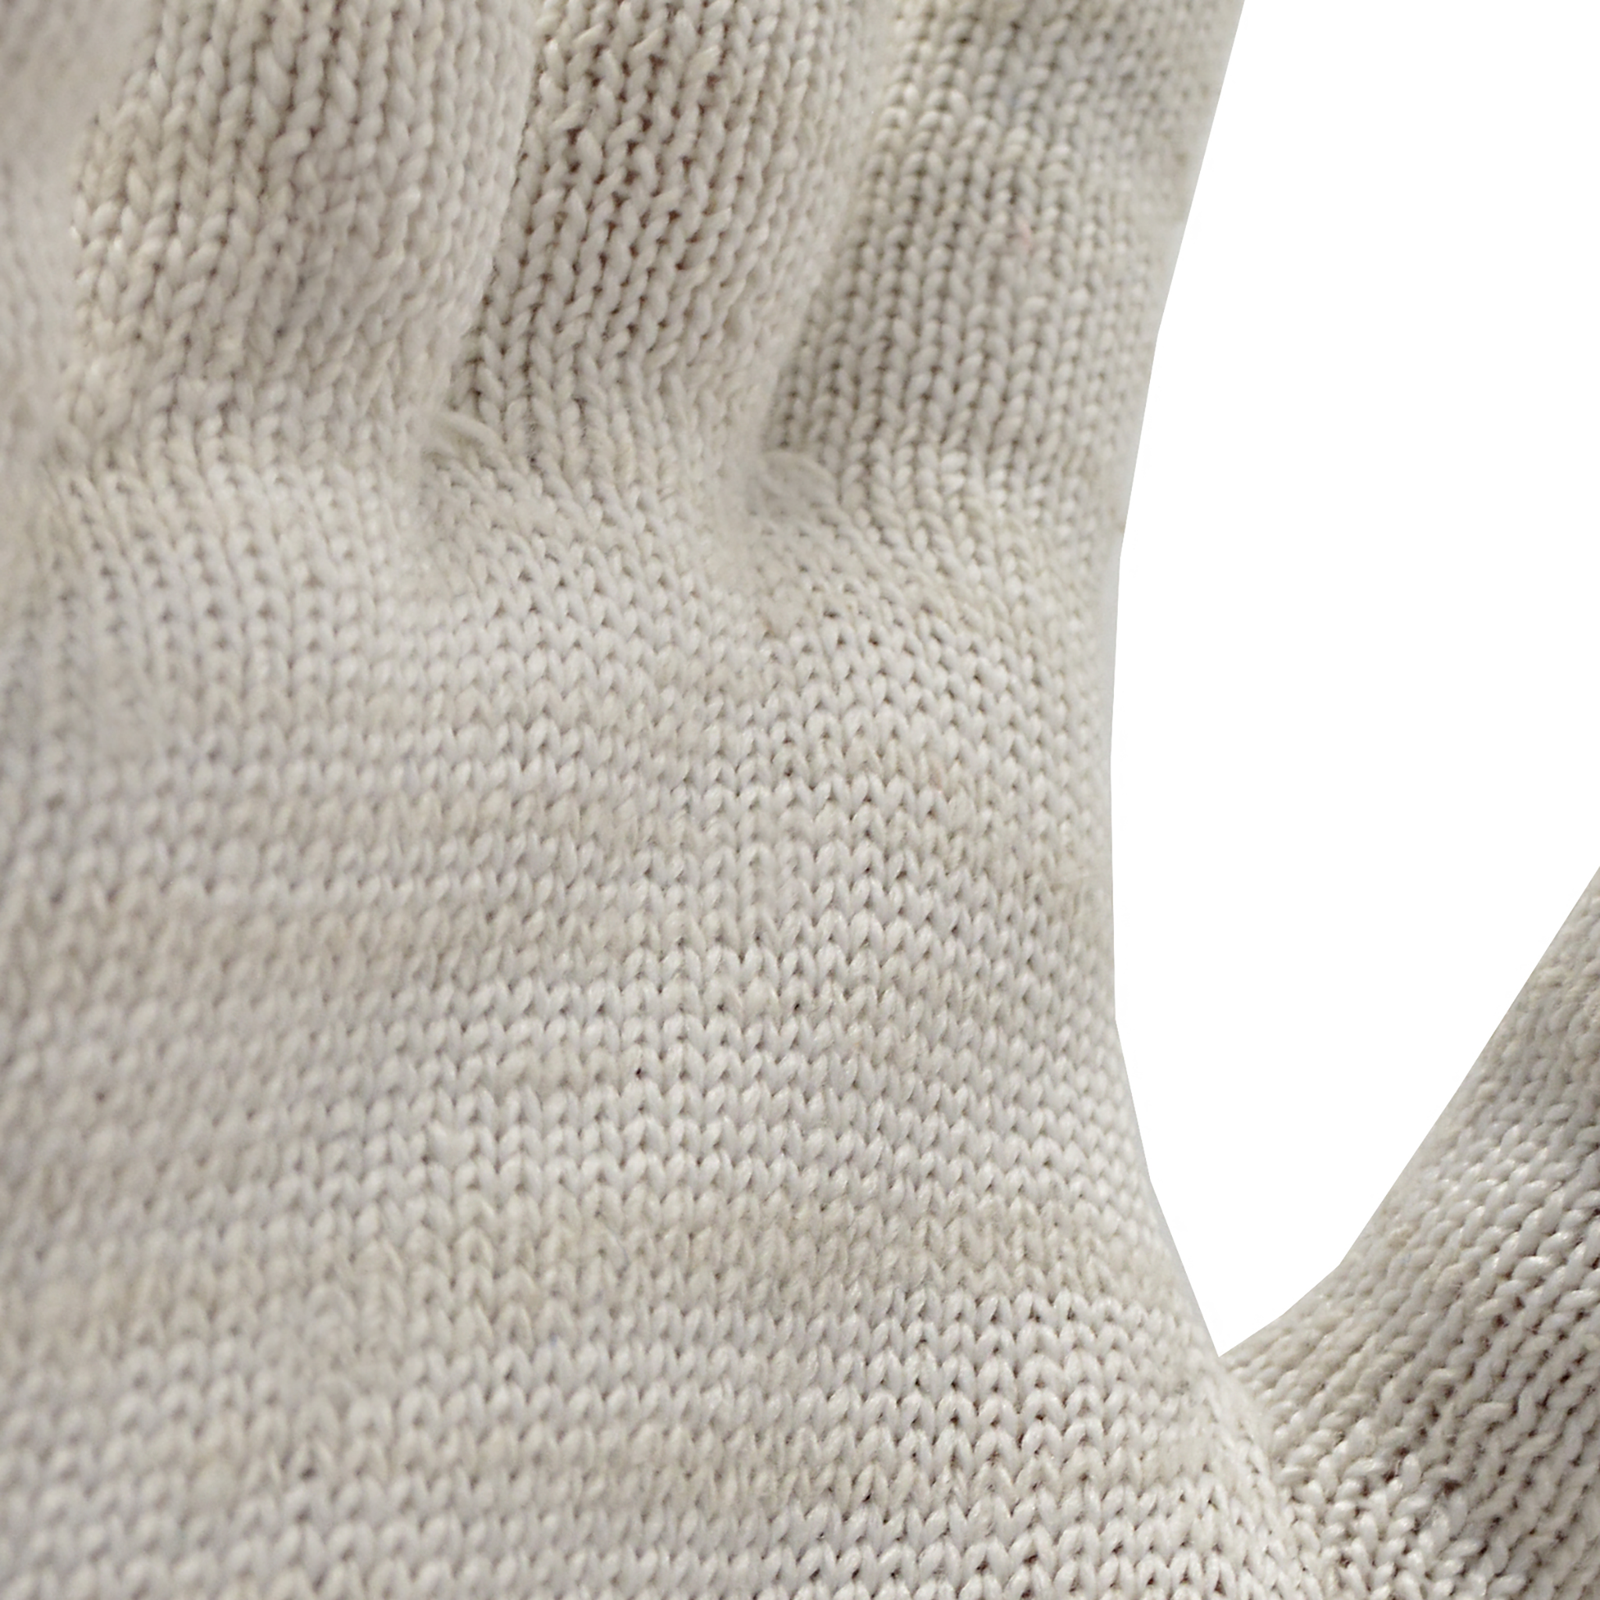 Close up of the fabric of the white knitted glove